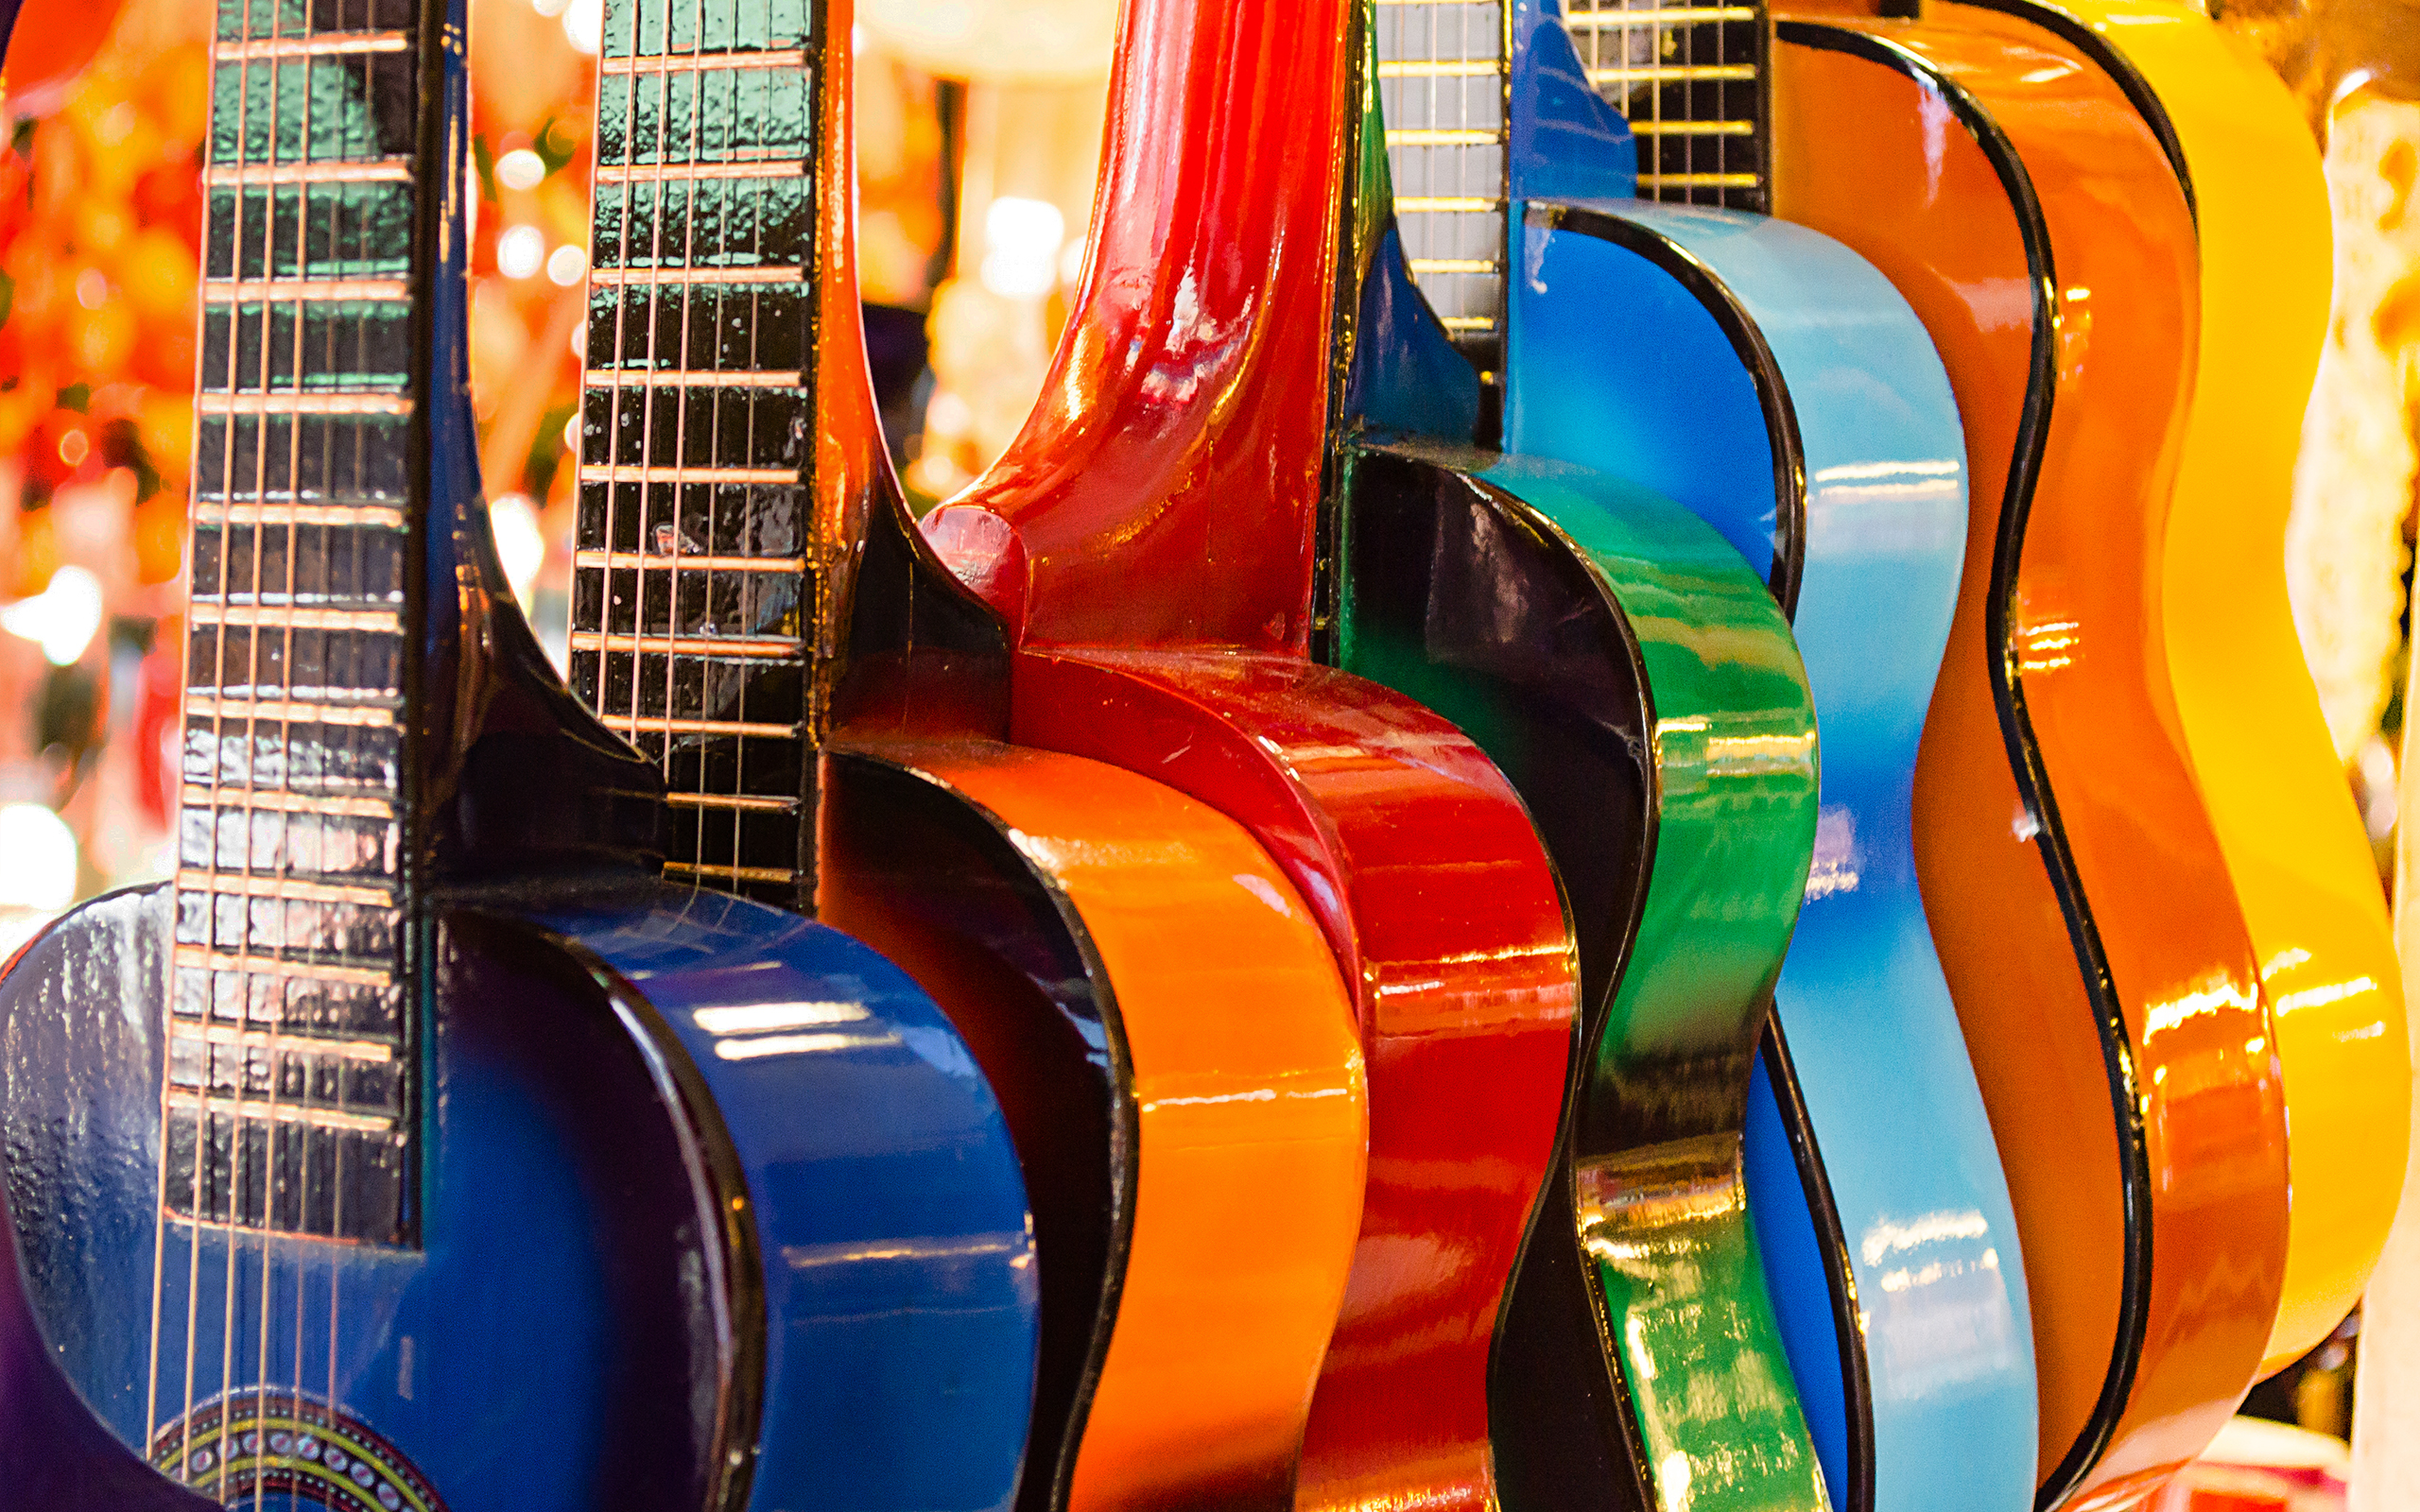 Colorful Guitars HD3696318480 - Colorful Guitars HD - Scandroid, Guitars, Colorful